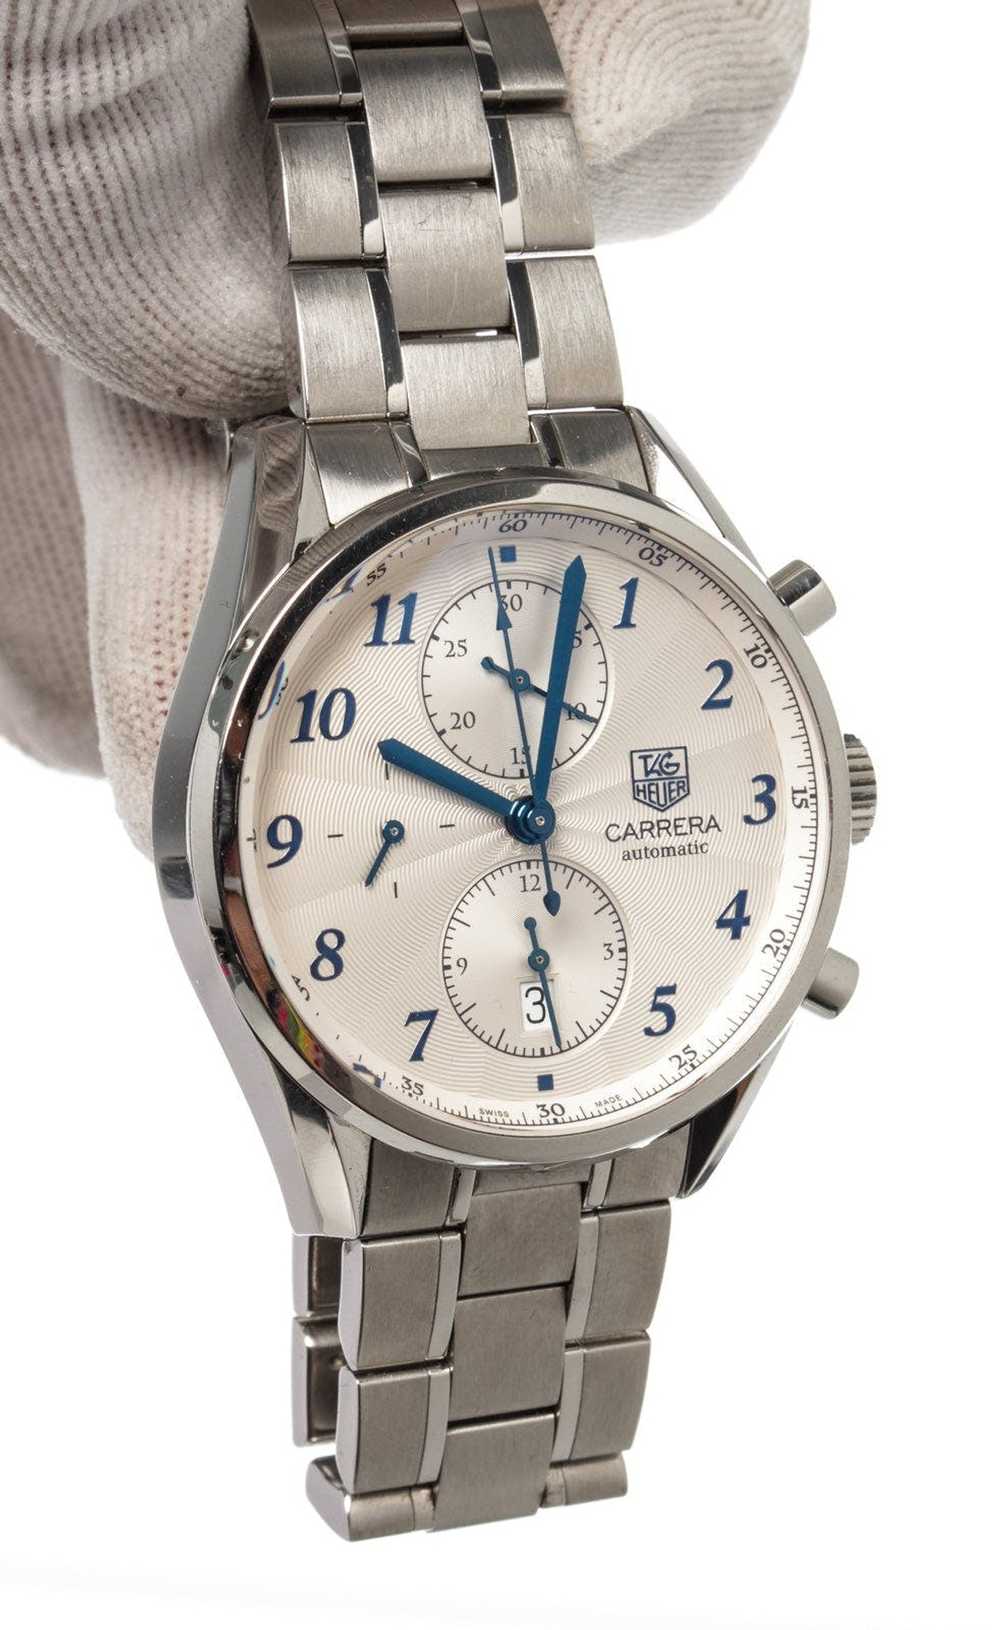 Tag Heuer Tag Heuer Silver Carrera Calibr Watch - image 6